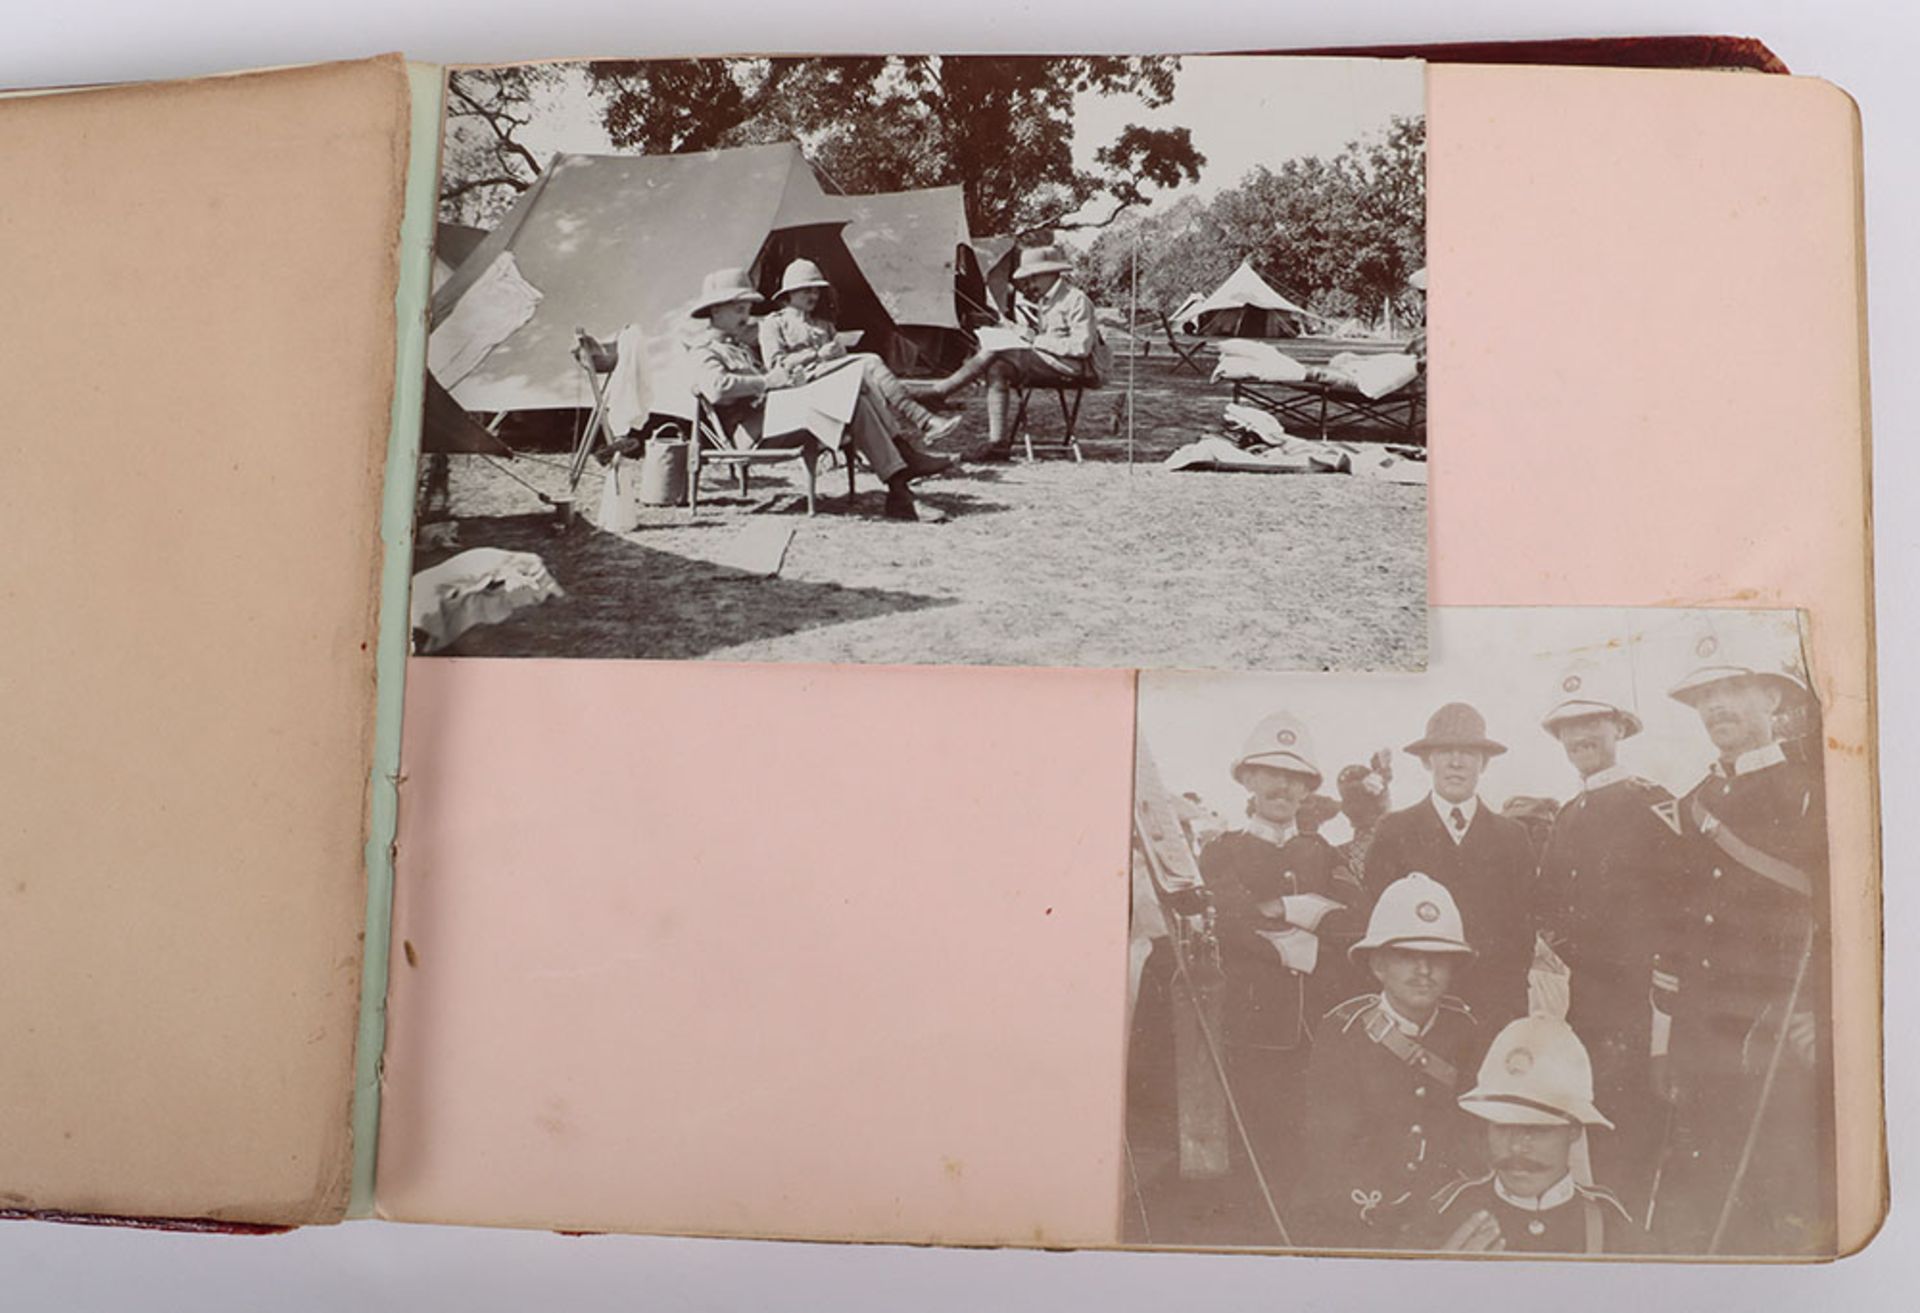 Photograph Album with images of ther Delhi Durbar, troops lining streets, Elephants, sacred cows bel - Image 7 of 48